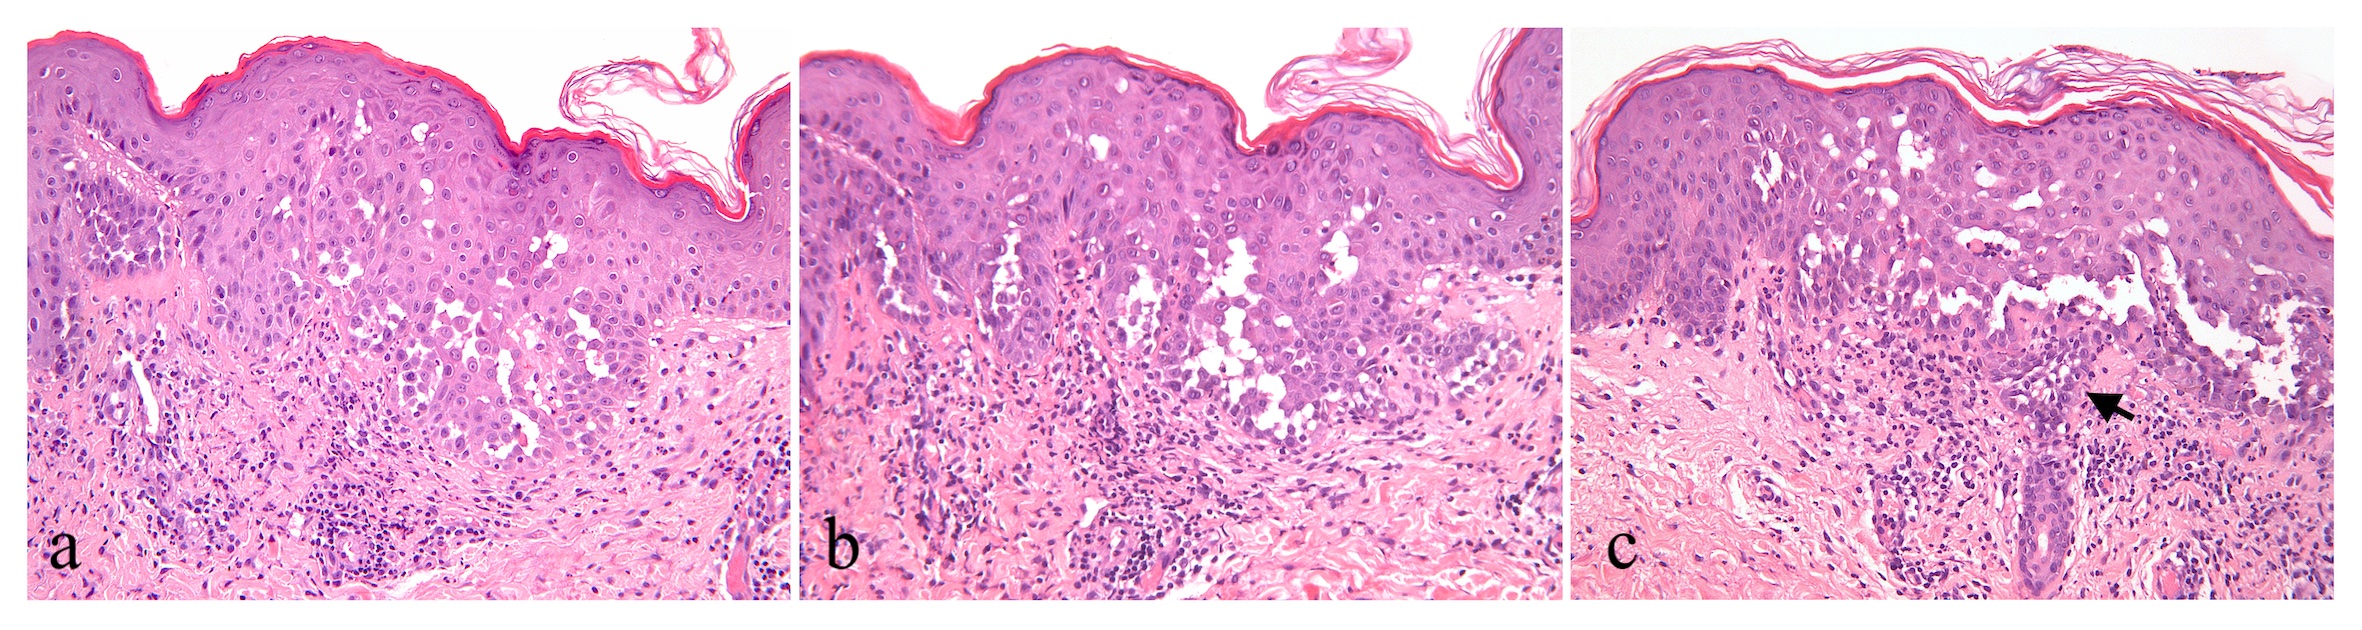 Suprabasal acantholysis with acantholytic cells characteristically throughout most of thickness of the hyperplastic epidermis giving the appearance of a dilapidated brick wall (a,b,c)